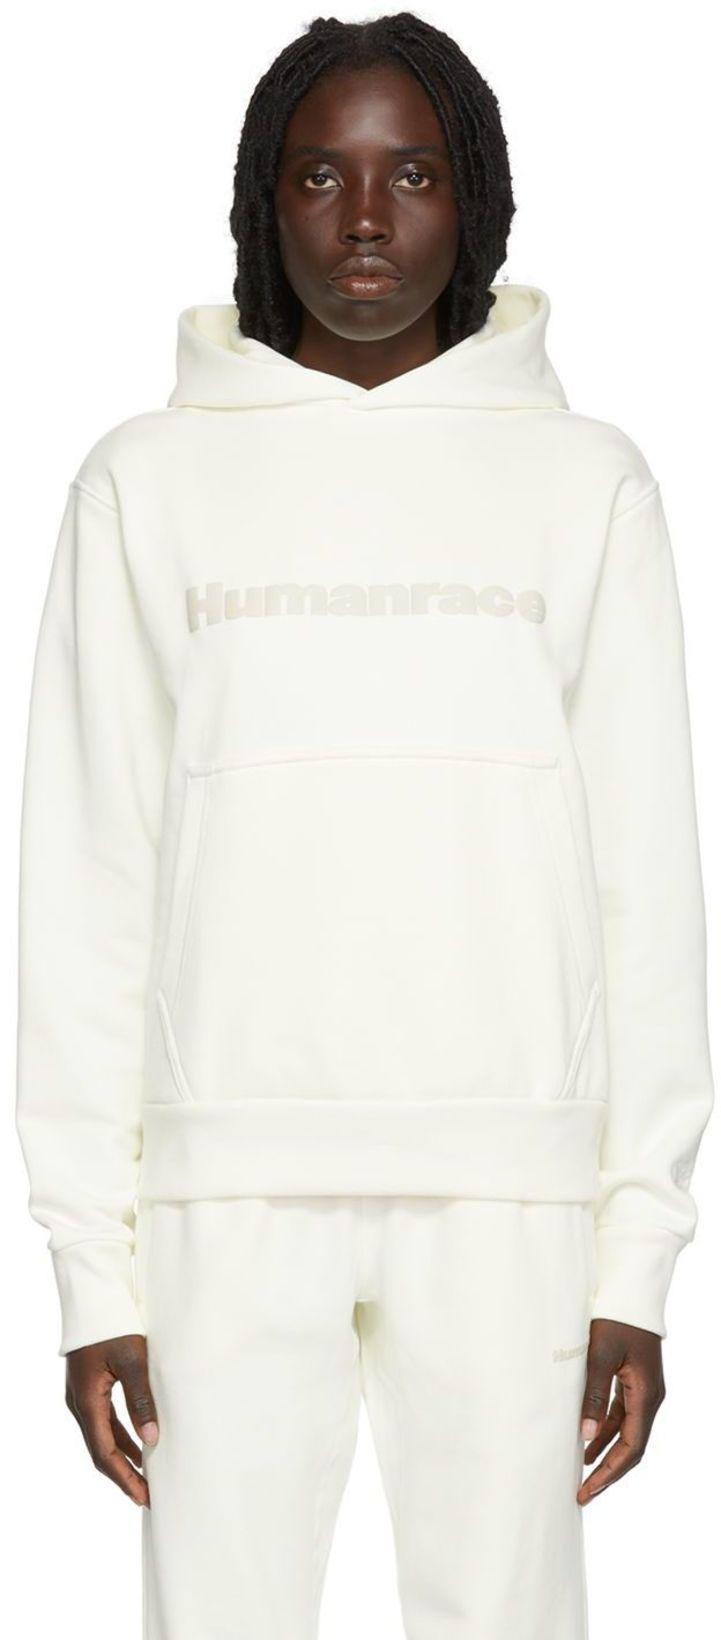 Off-White Humanrace Basics Hoodie by ADIDAS X HUMANRACE BY PHARRELL WILLIAMS